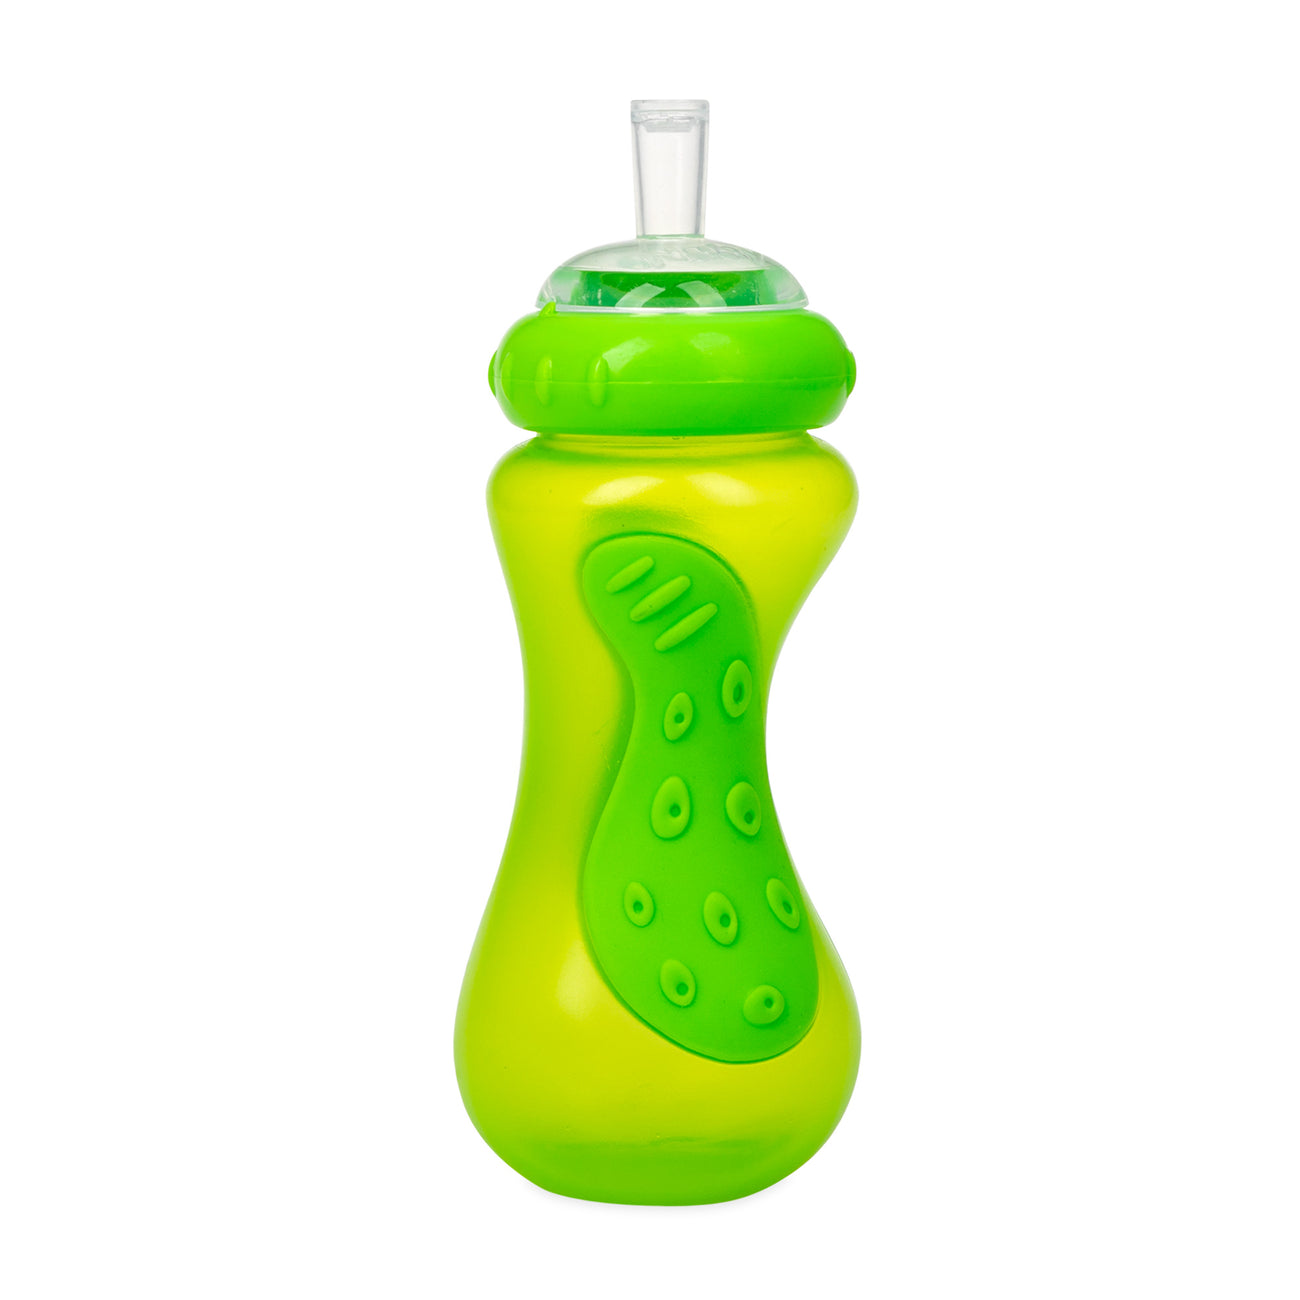 No-Spill Sport Sipper with Leakproof Straw - Nuby US